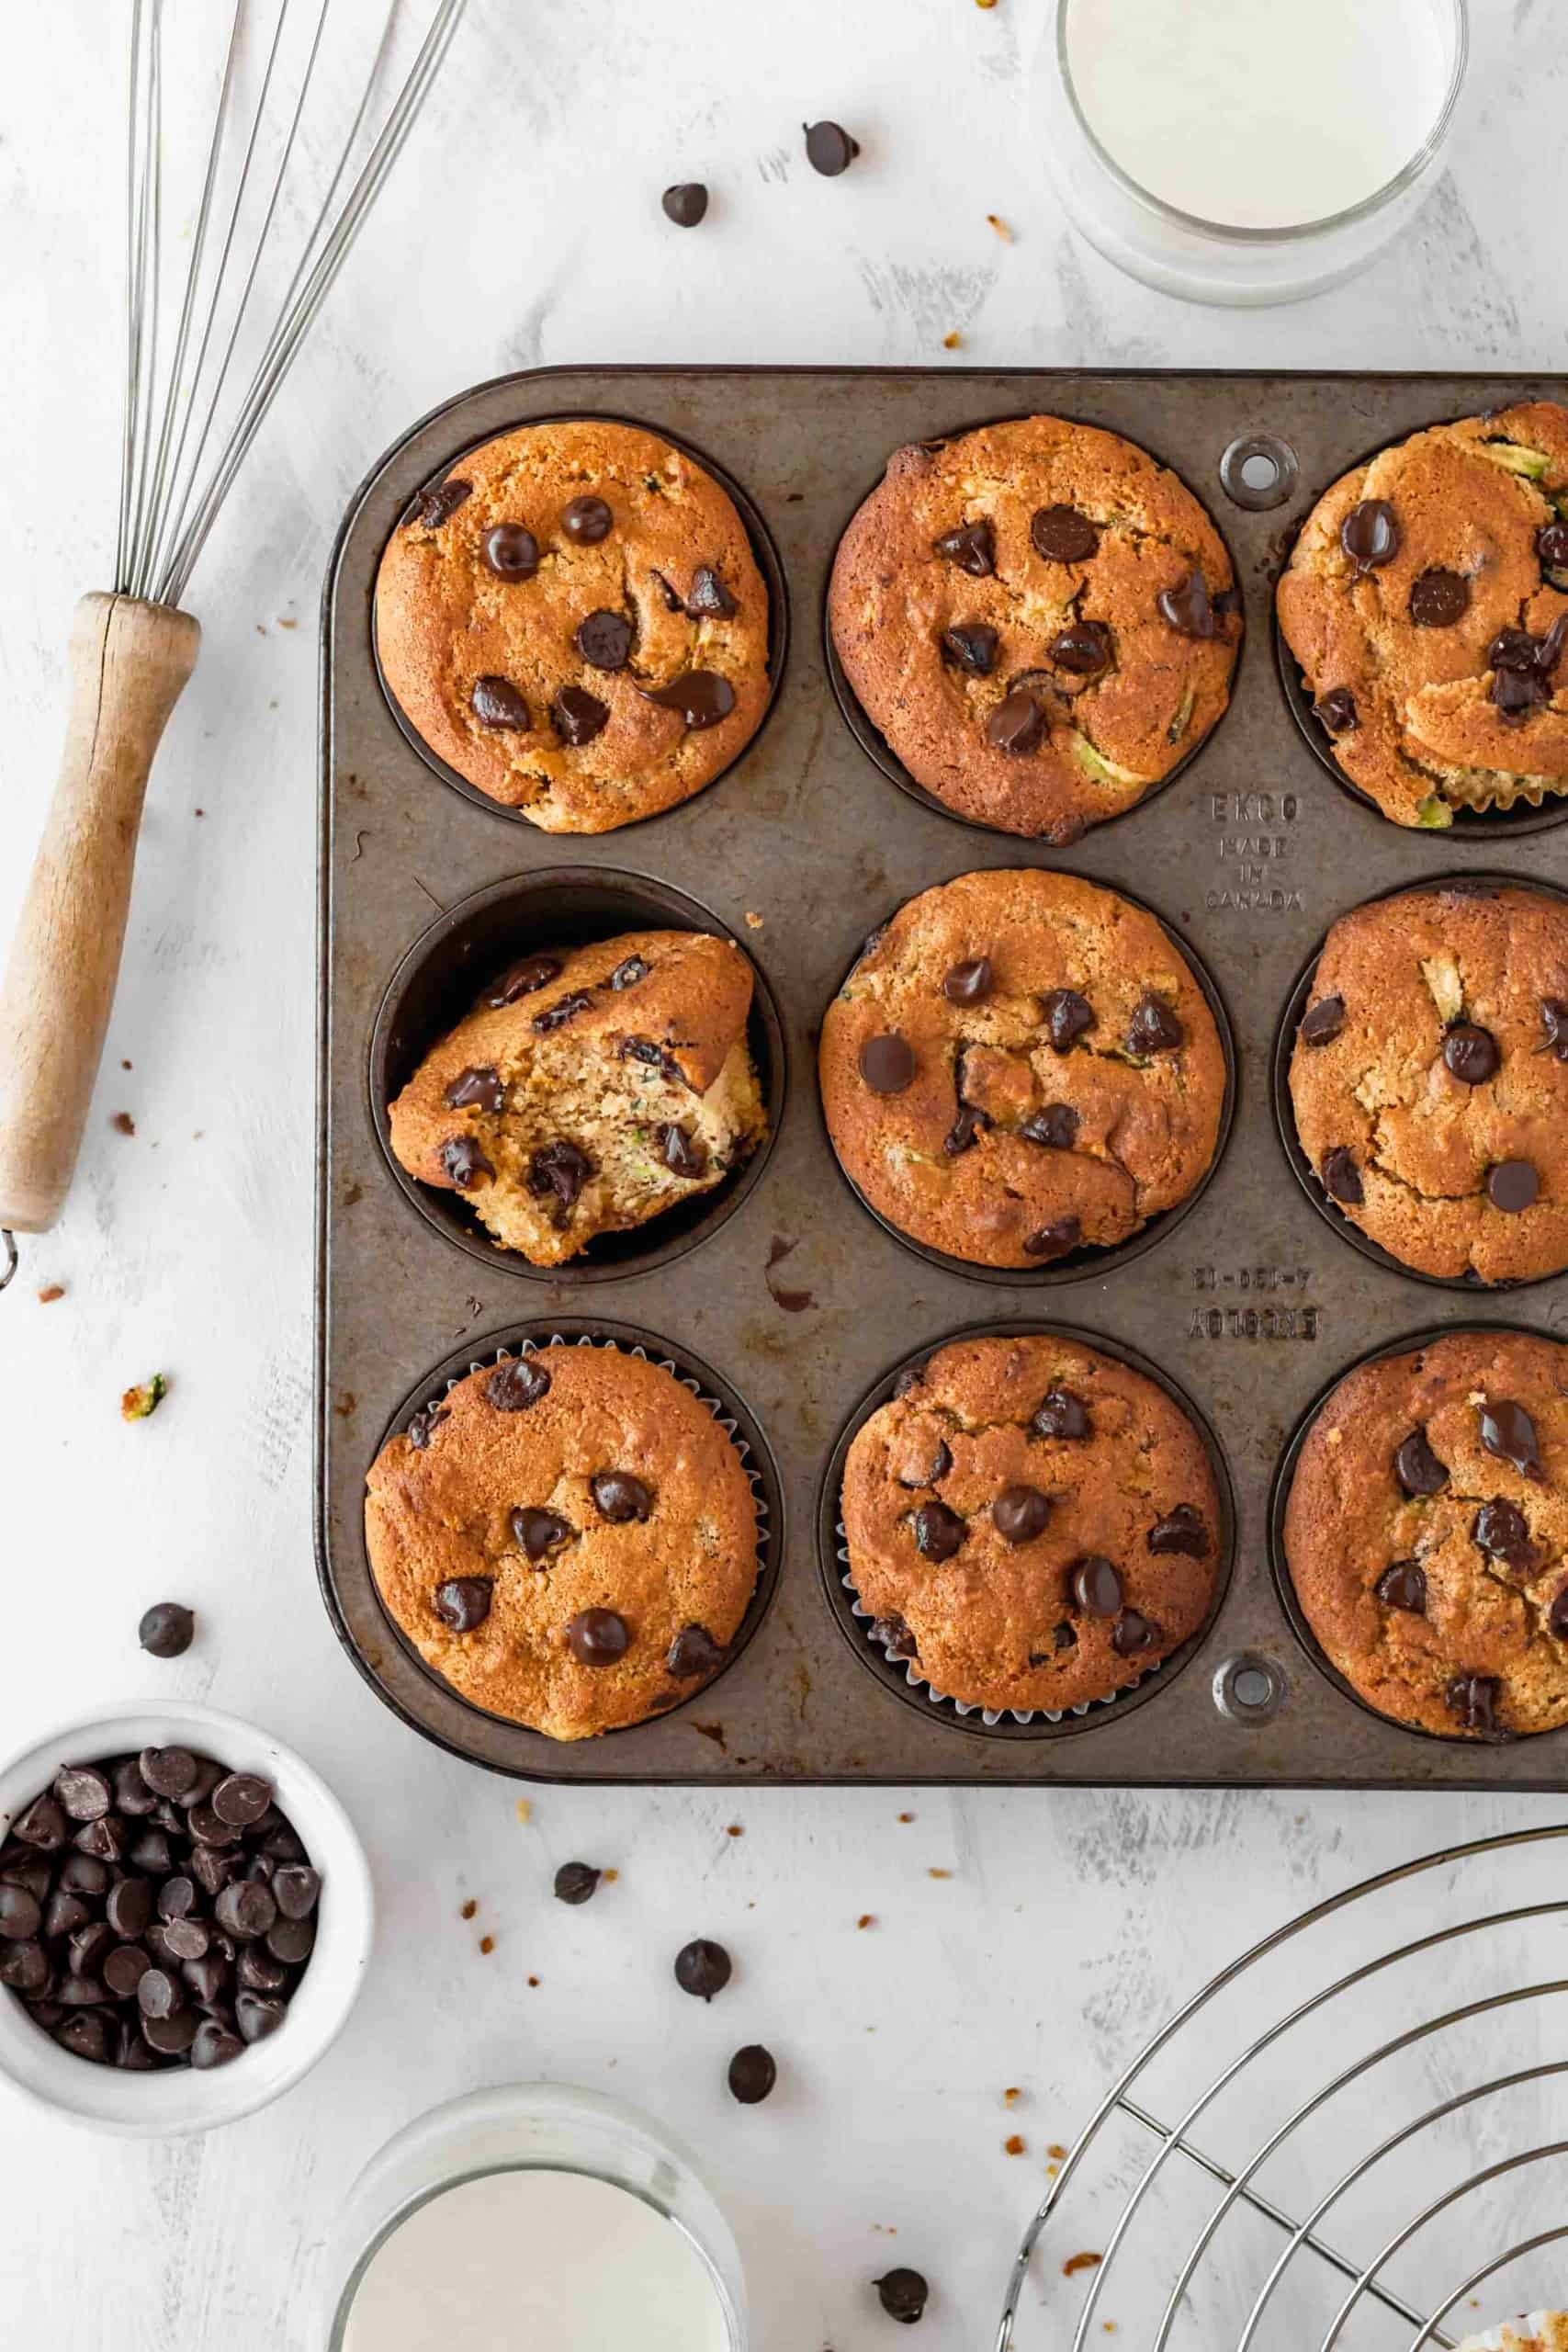 Gluten free zucchini muffins with chocolate chips in a muffin pan